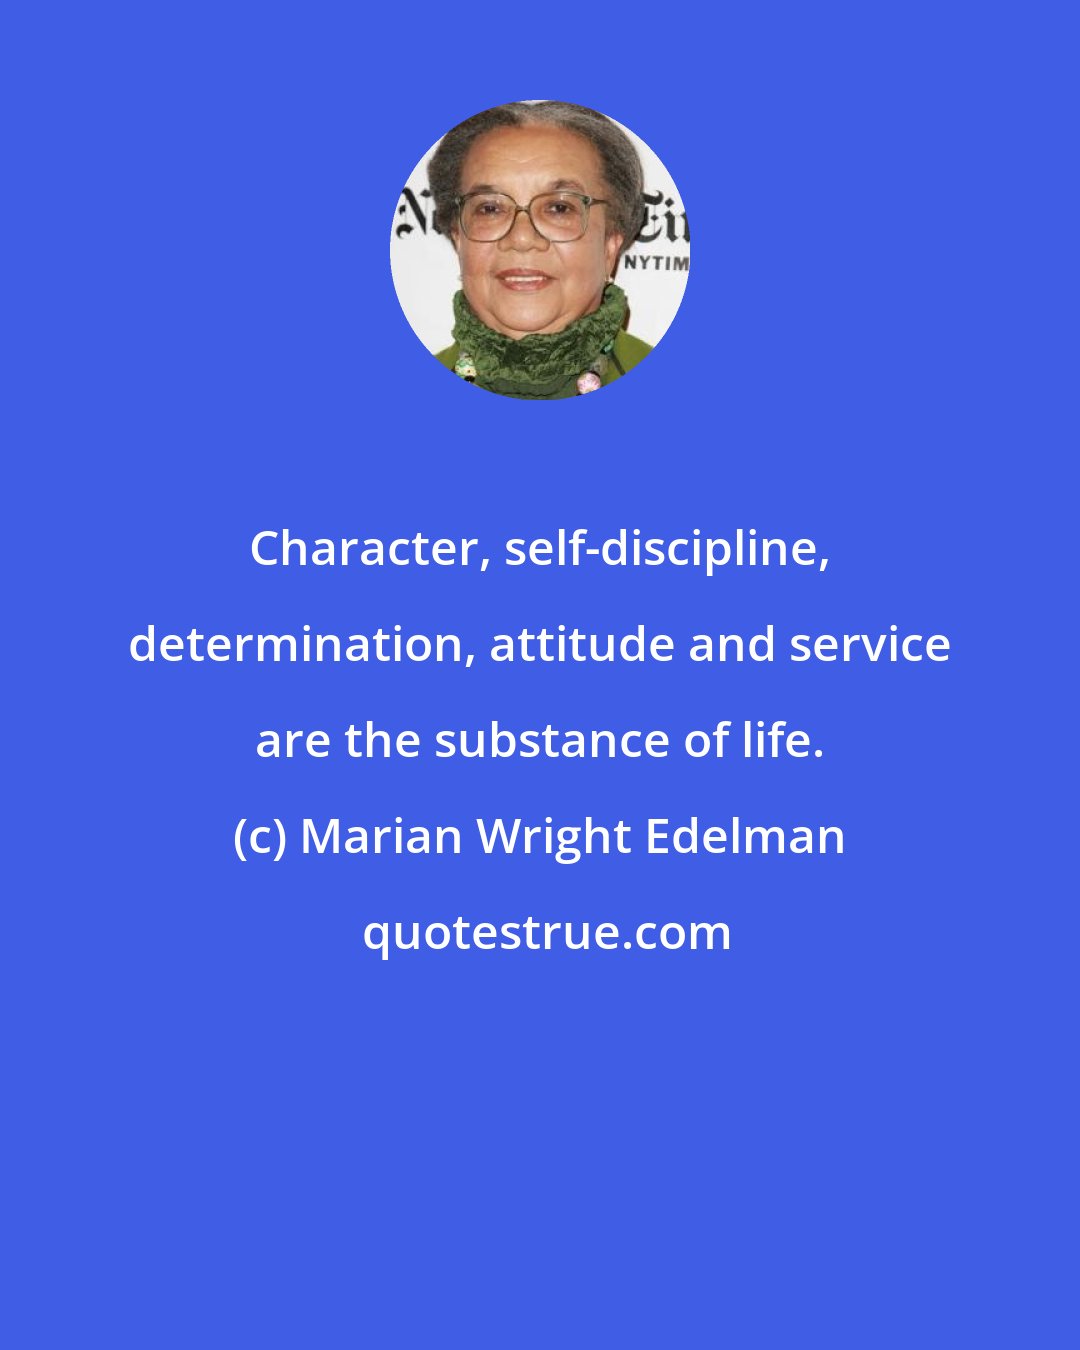 Marian Wright Edelman: Character, self-discipline, determination, attitude and service are the substance of life.